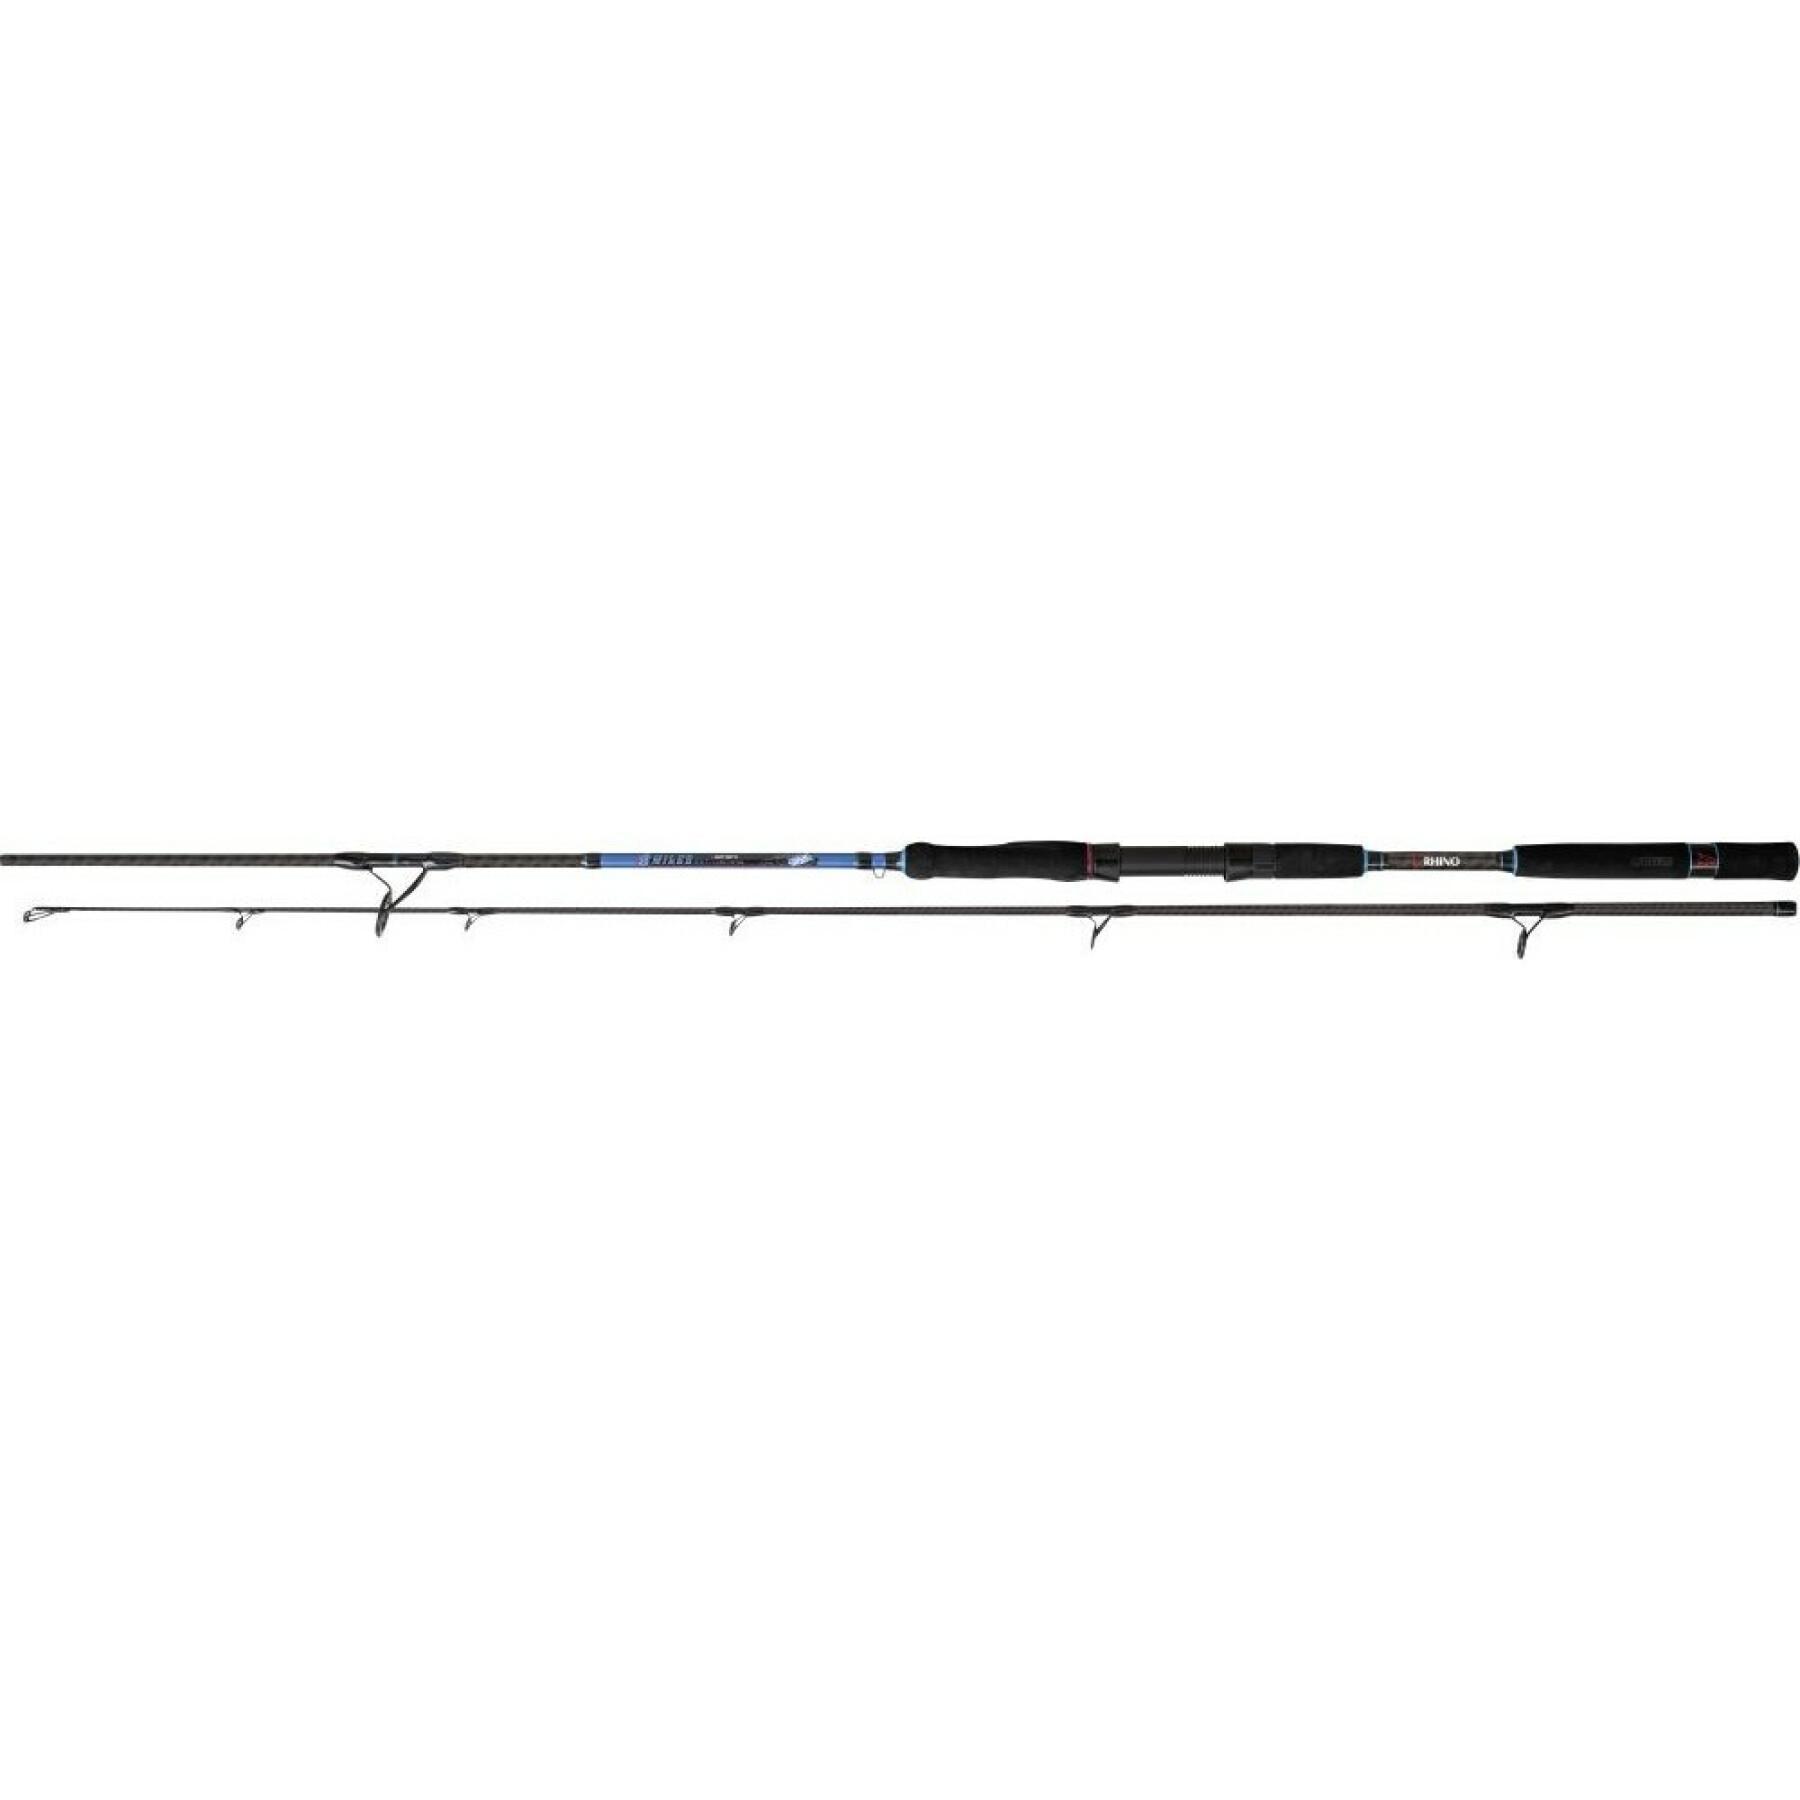 Cana Rhino 8 Miles Out Boat Cast M 165g